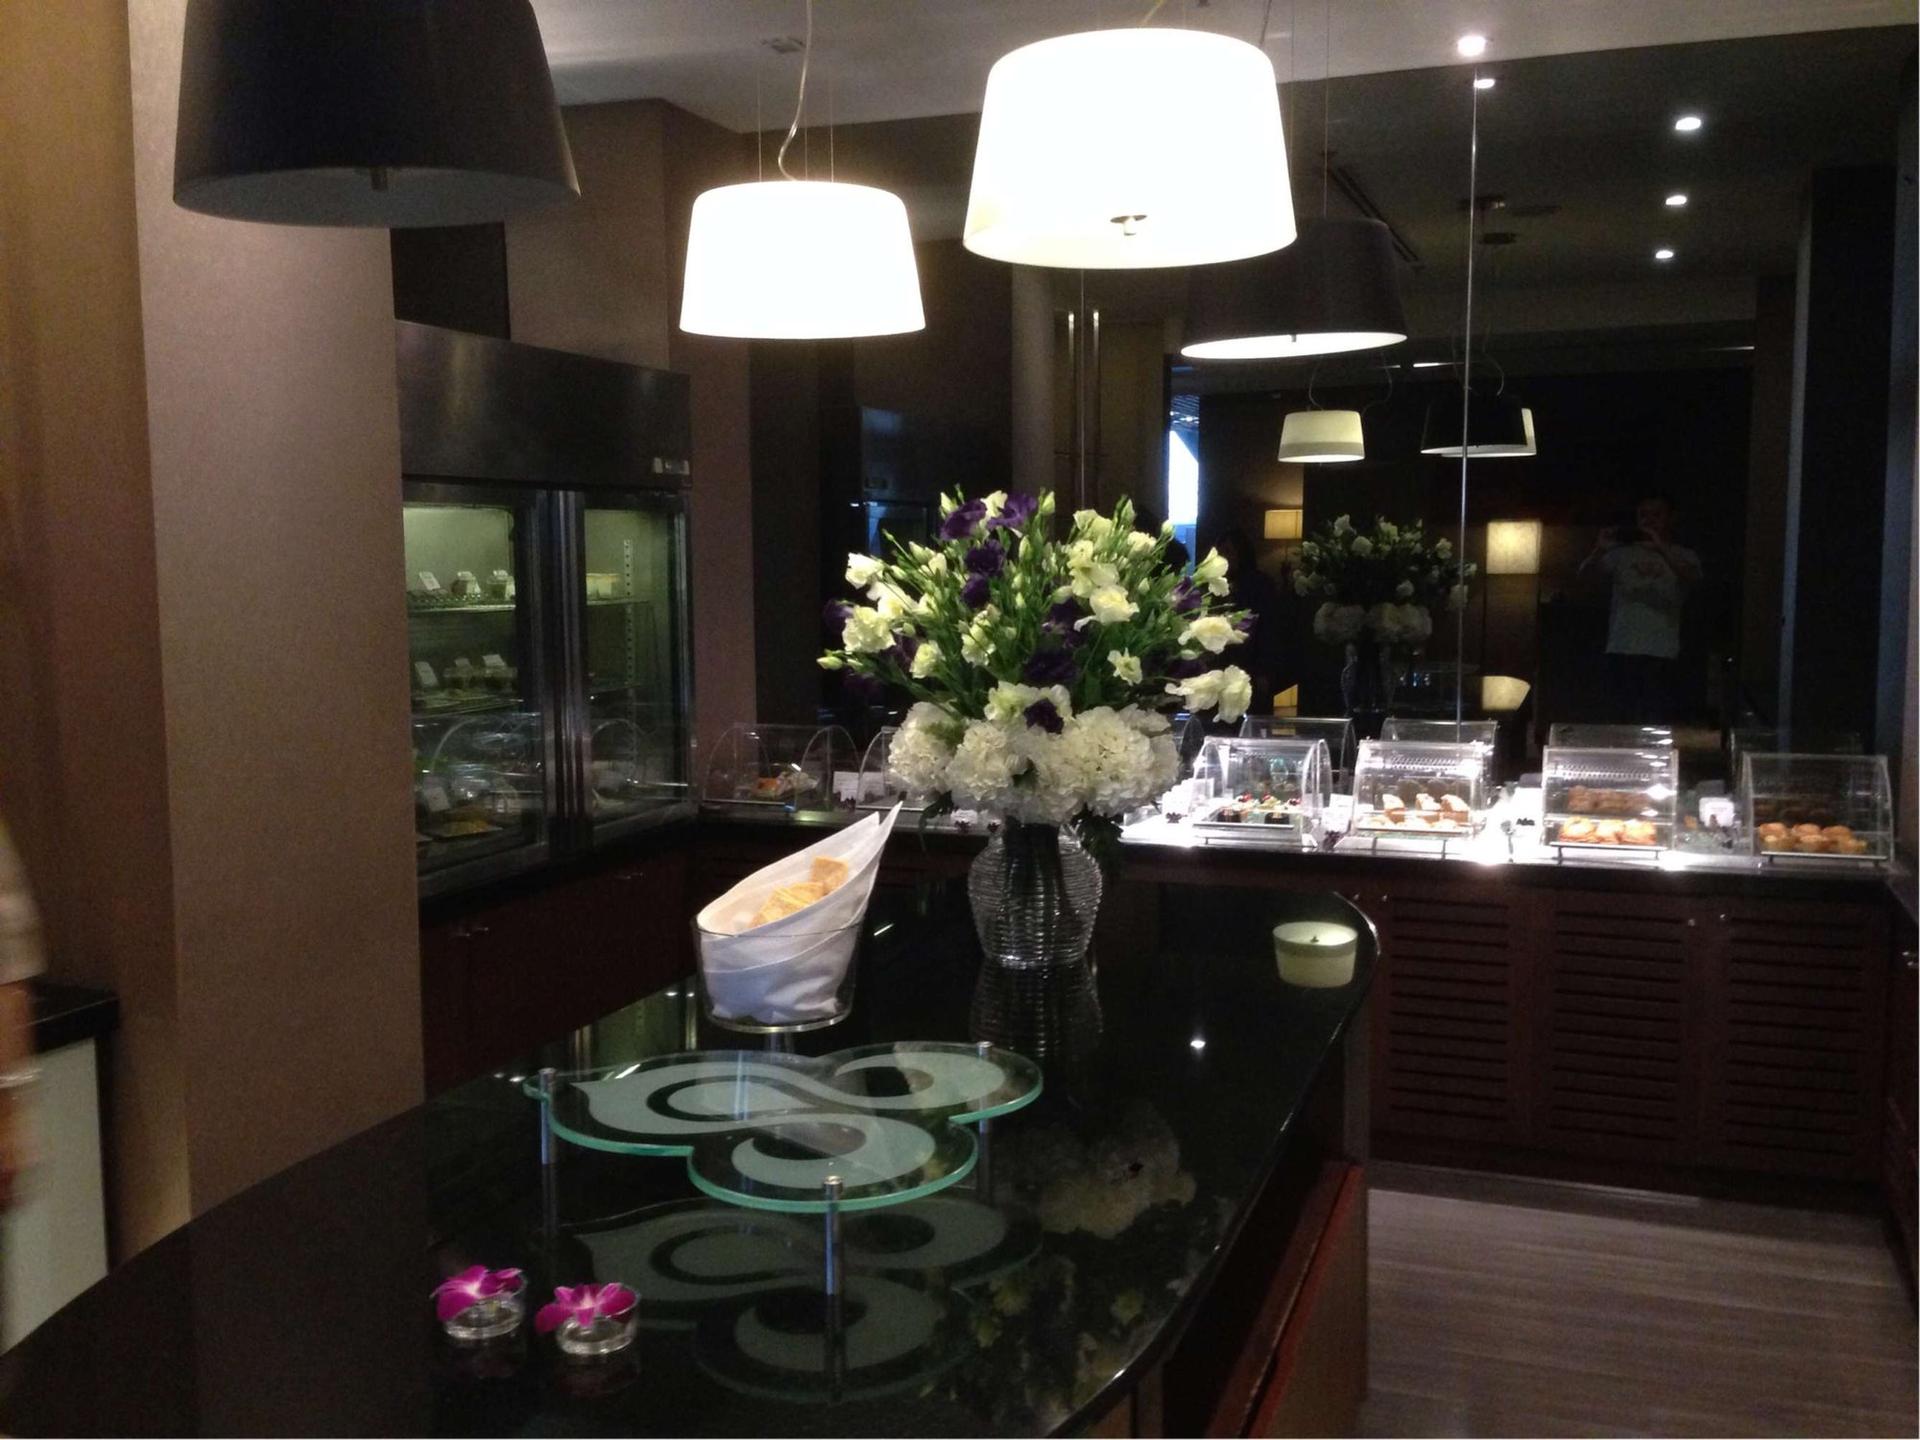 Thai Airways Royal First Class Lounge image 14 of 44